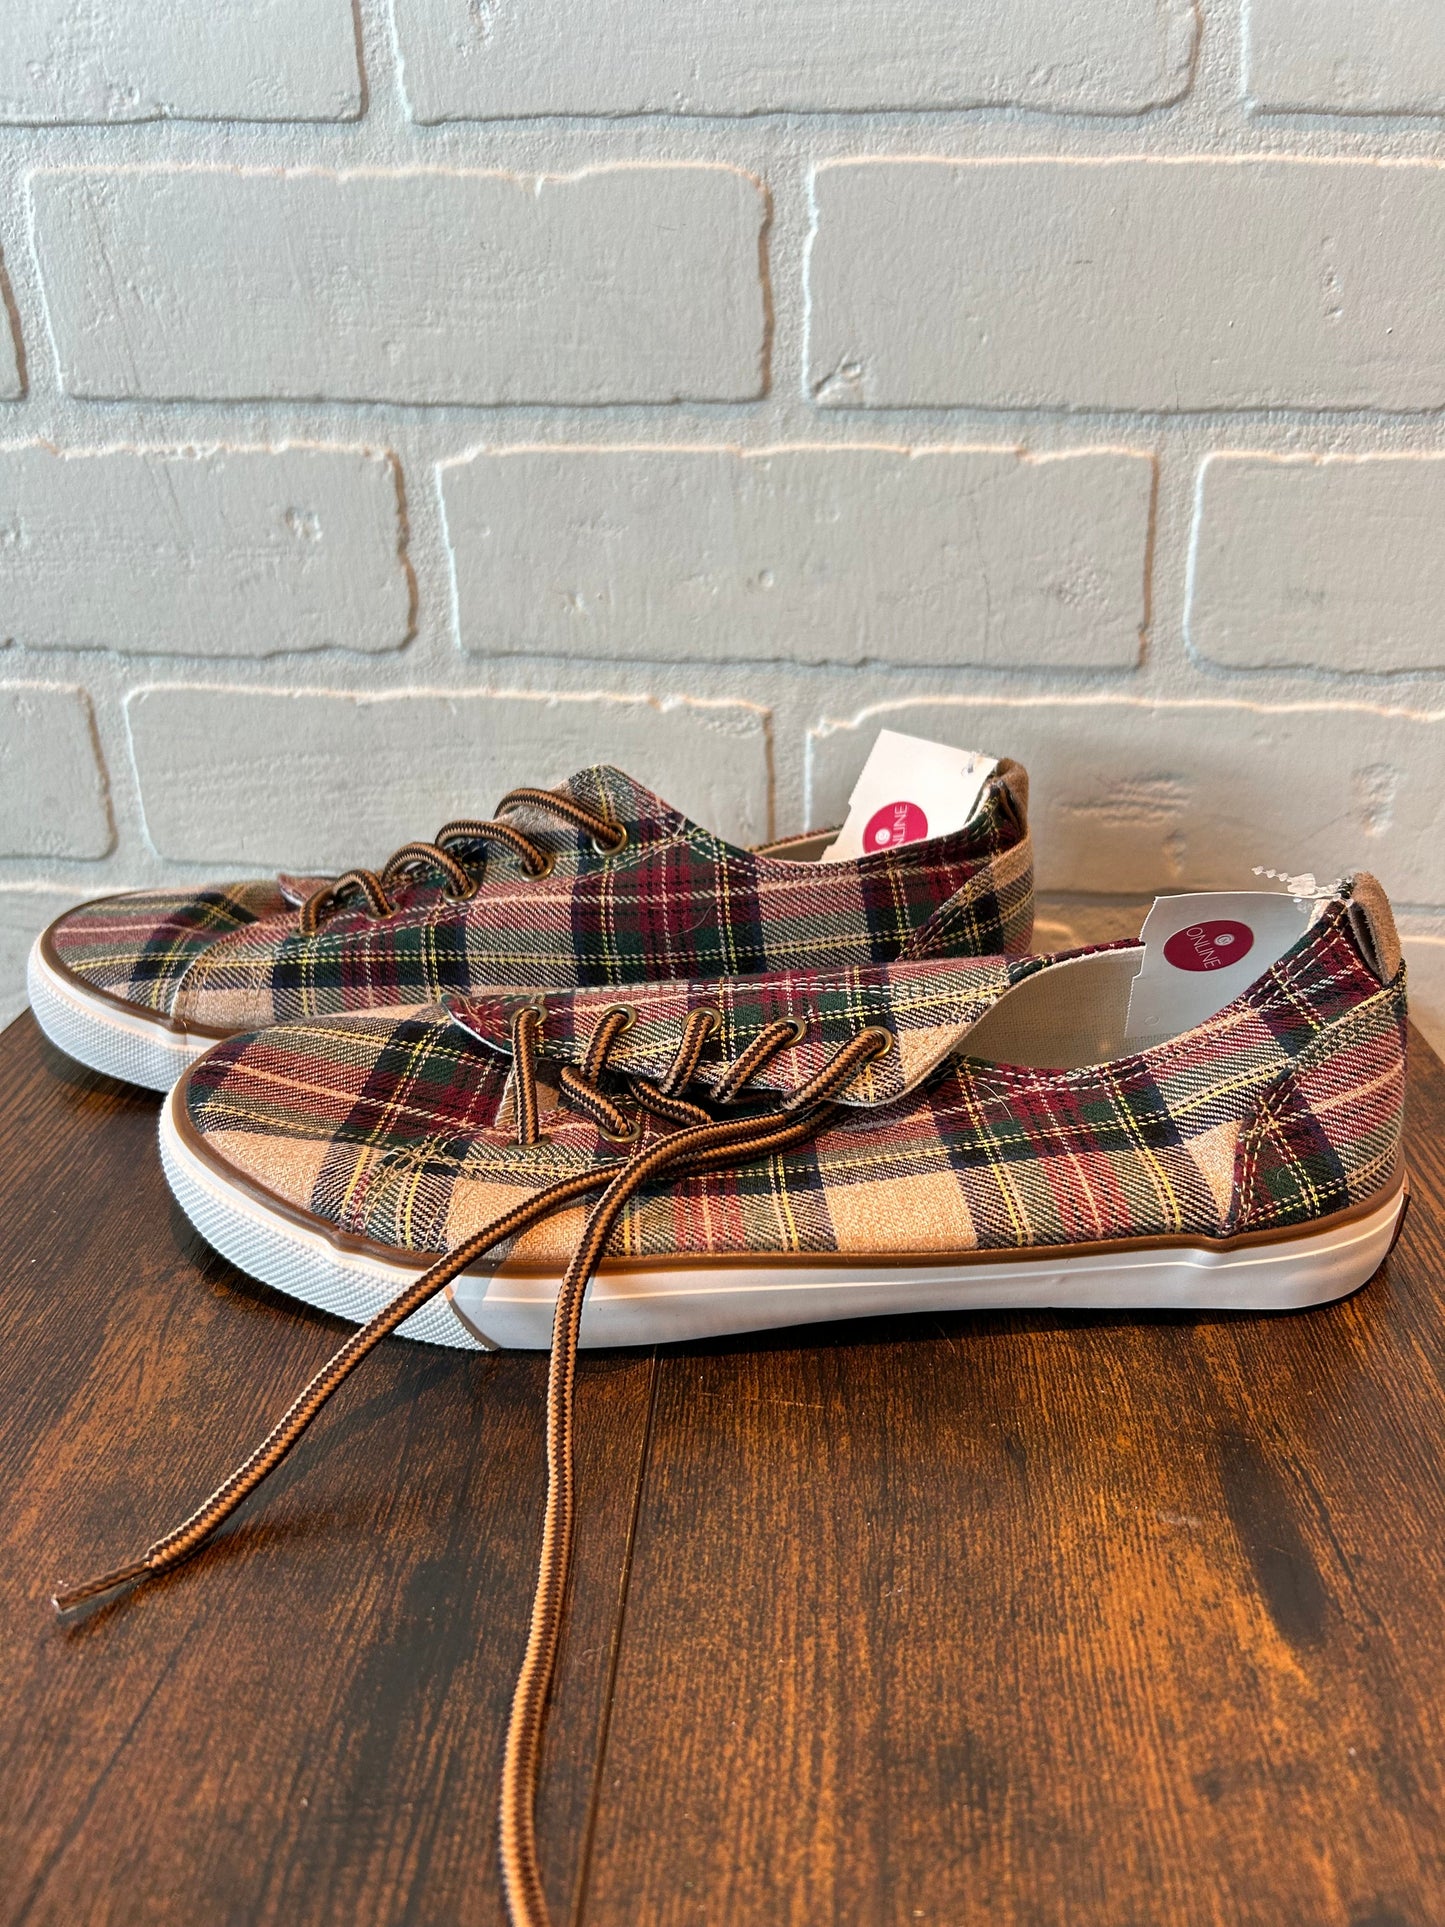 Plaid Pattern Shoes Sneakers Clothes Mentor, Size 9